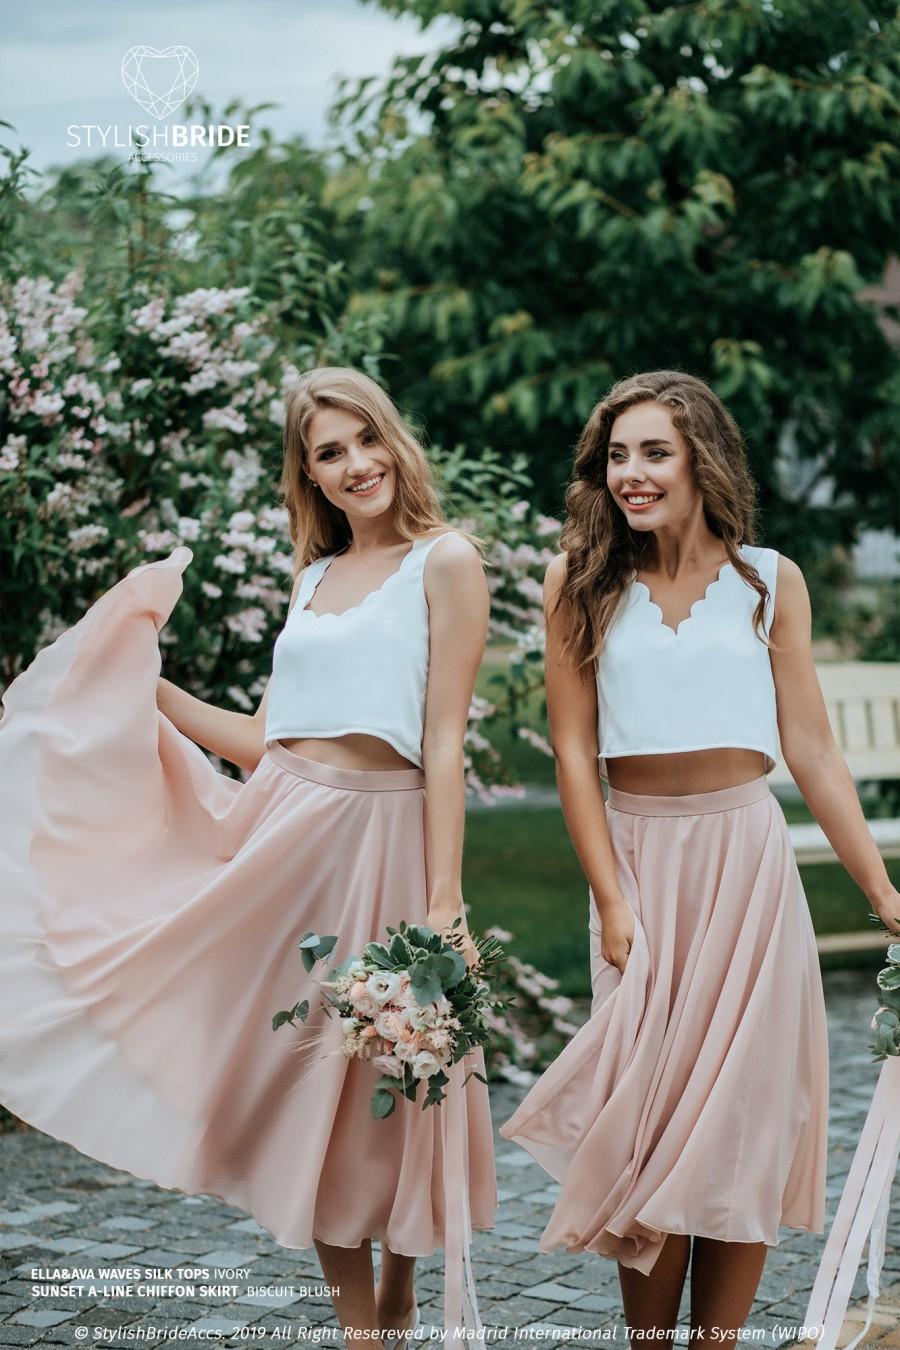 Wedding - Chiffon Knee/Tea Length "Sunset" Full Sun Flying A-line Bridesmaid Skirts and Waves Silk Tops available in Plus Sizes